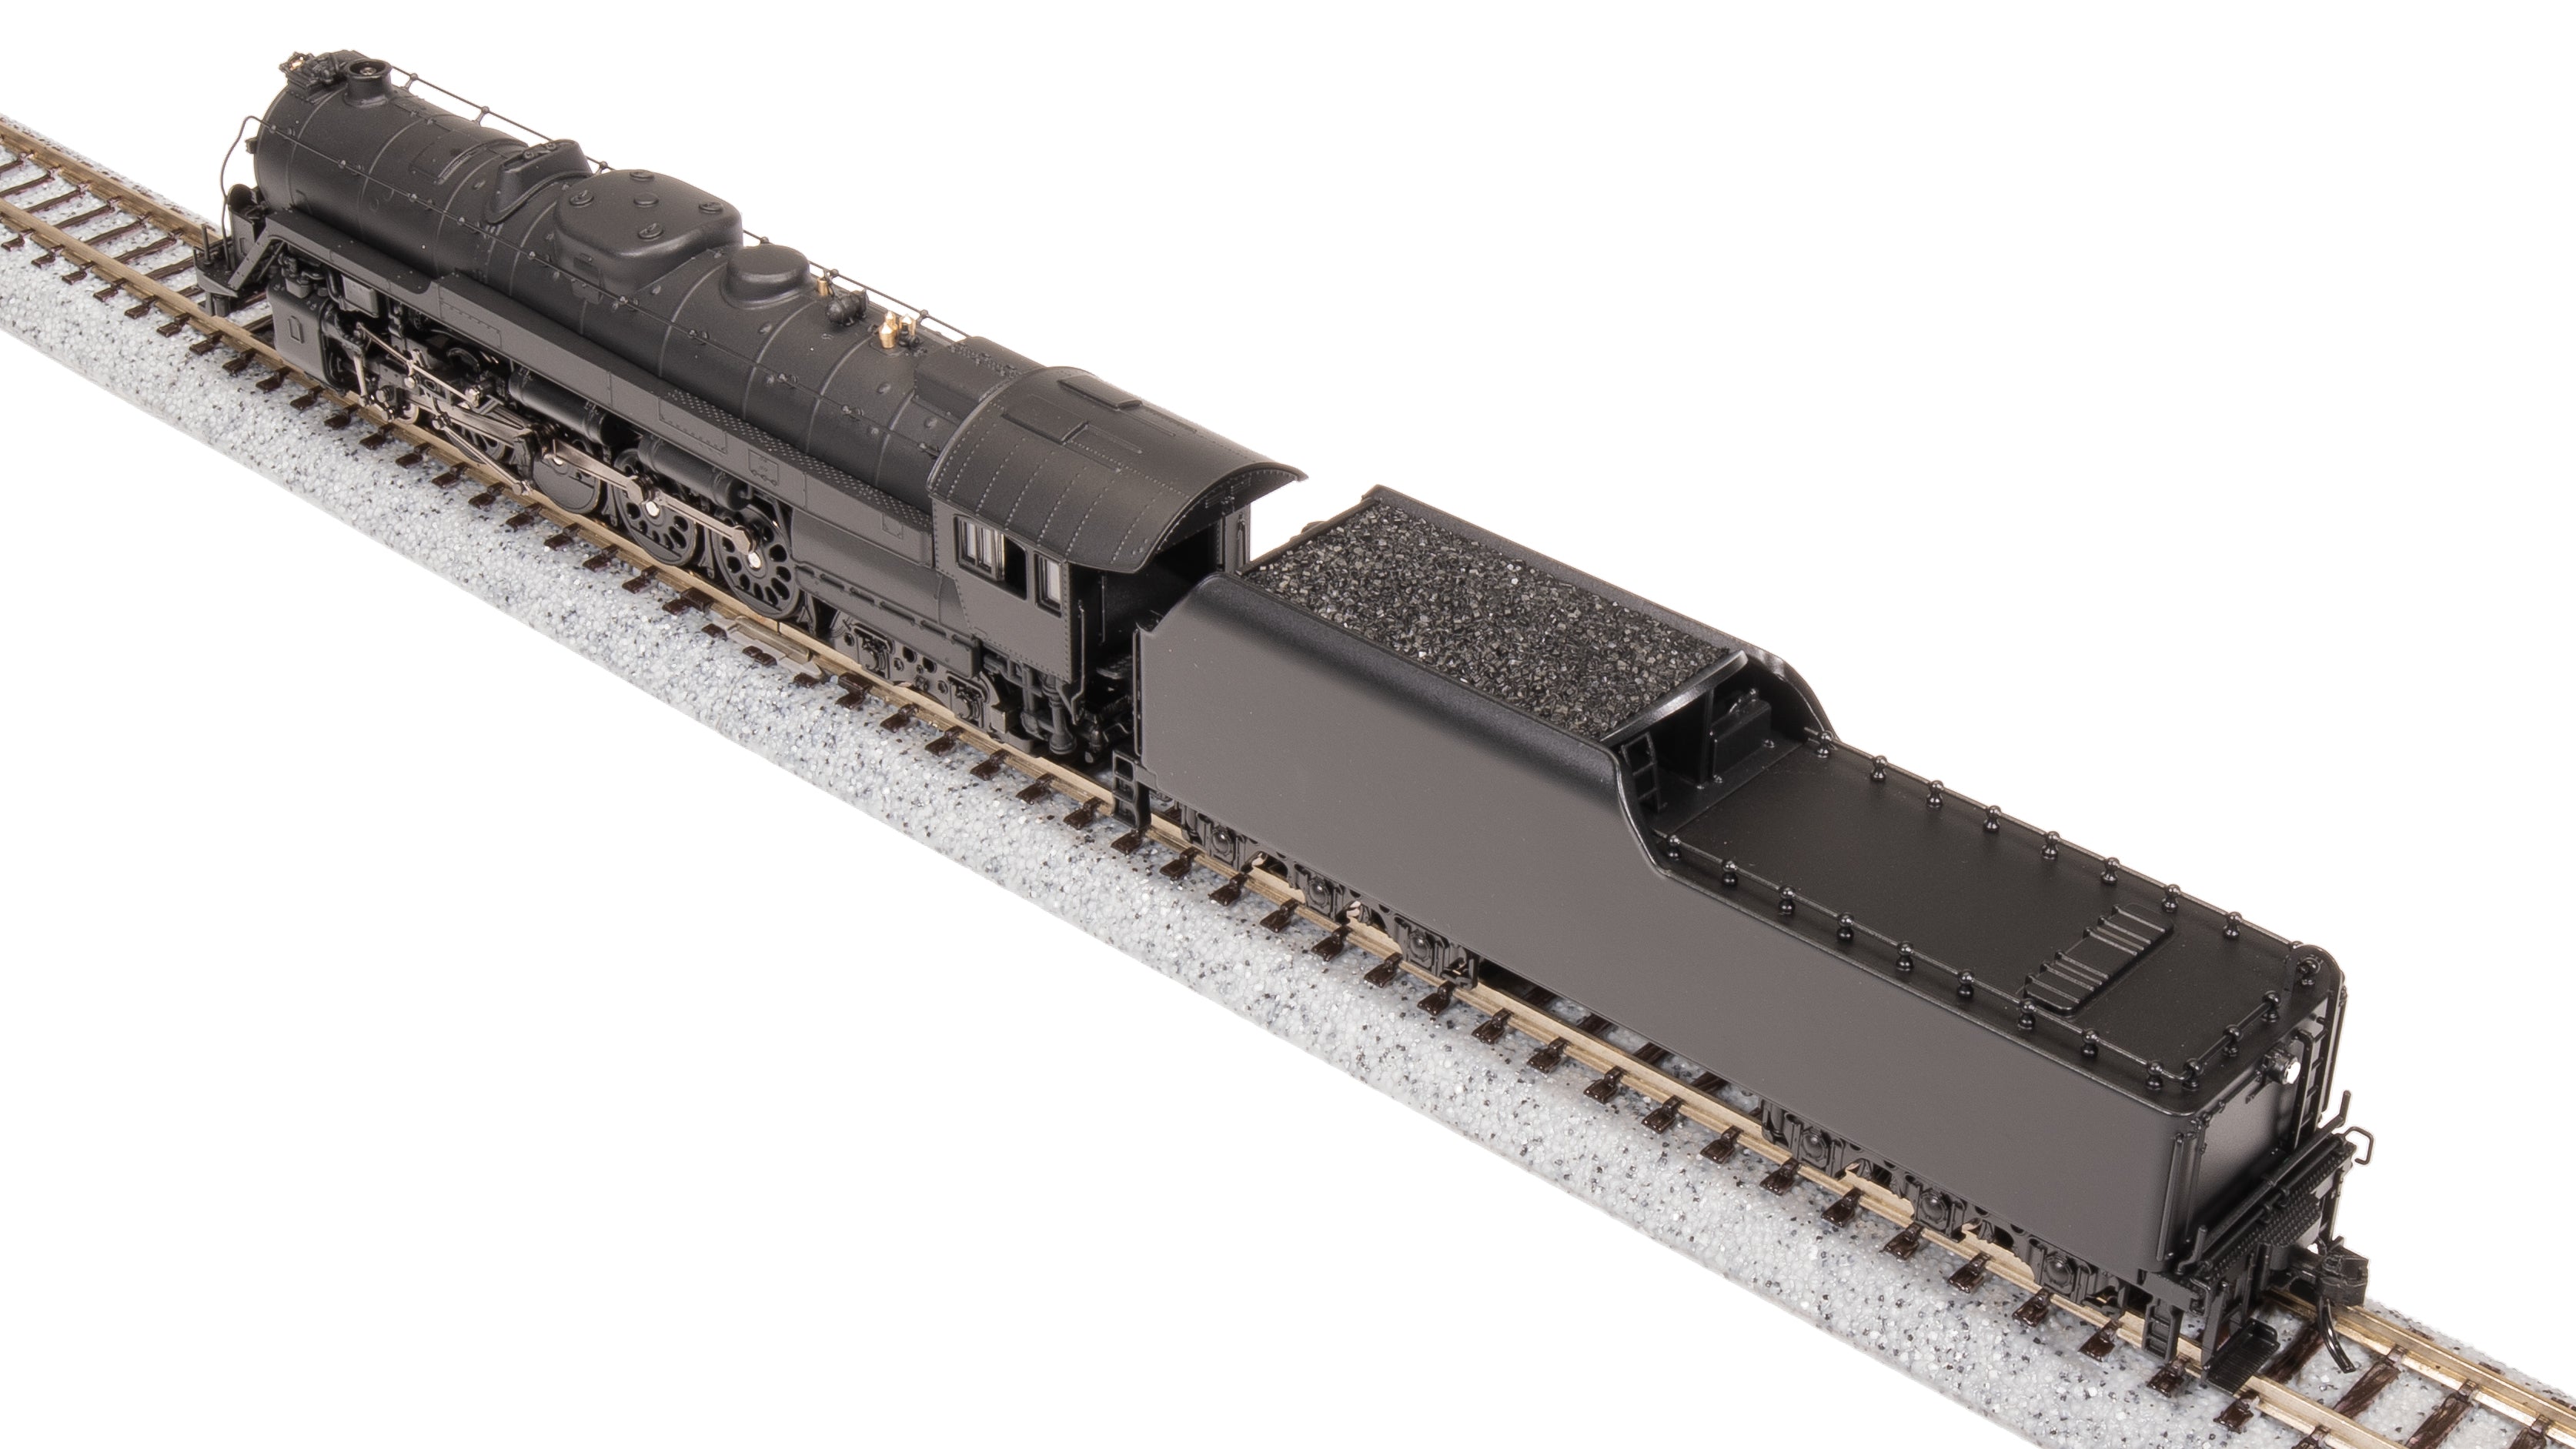 7413 Reading T1 4-8-4, Unlettered, Paragon4 Sound/DC/DCC, Smoke, N